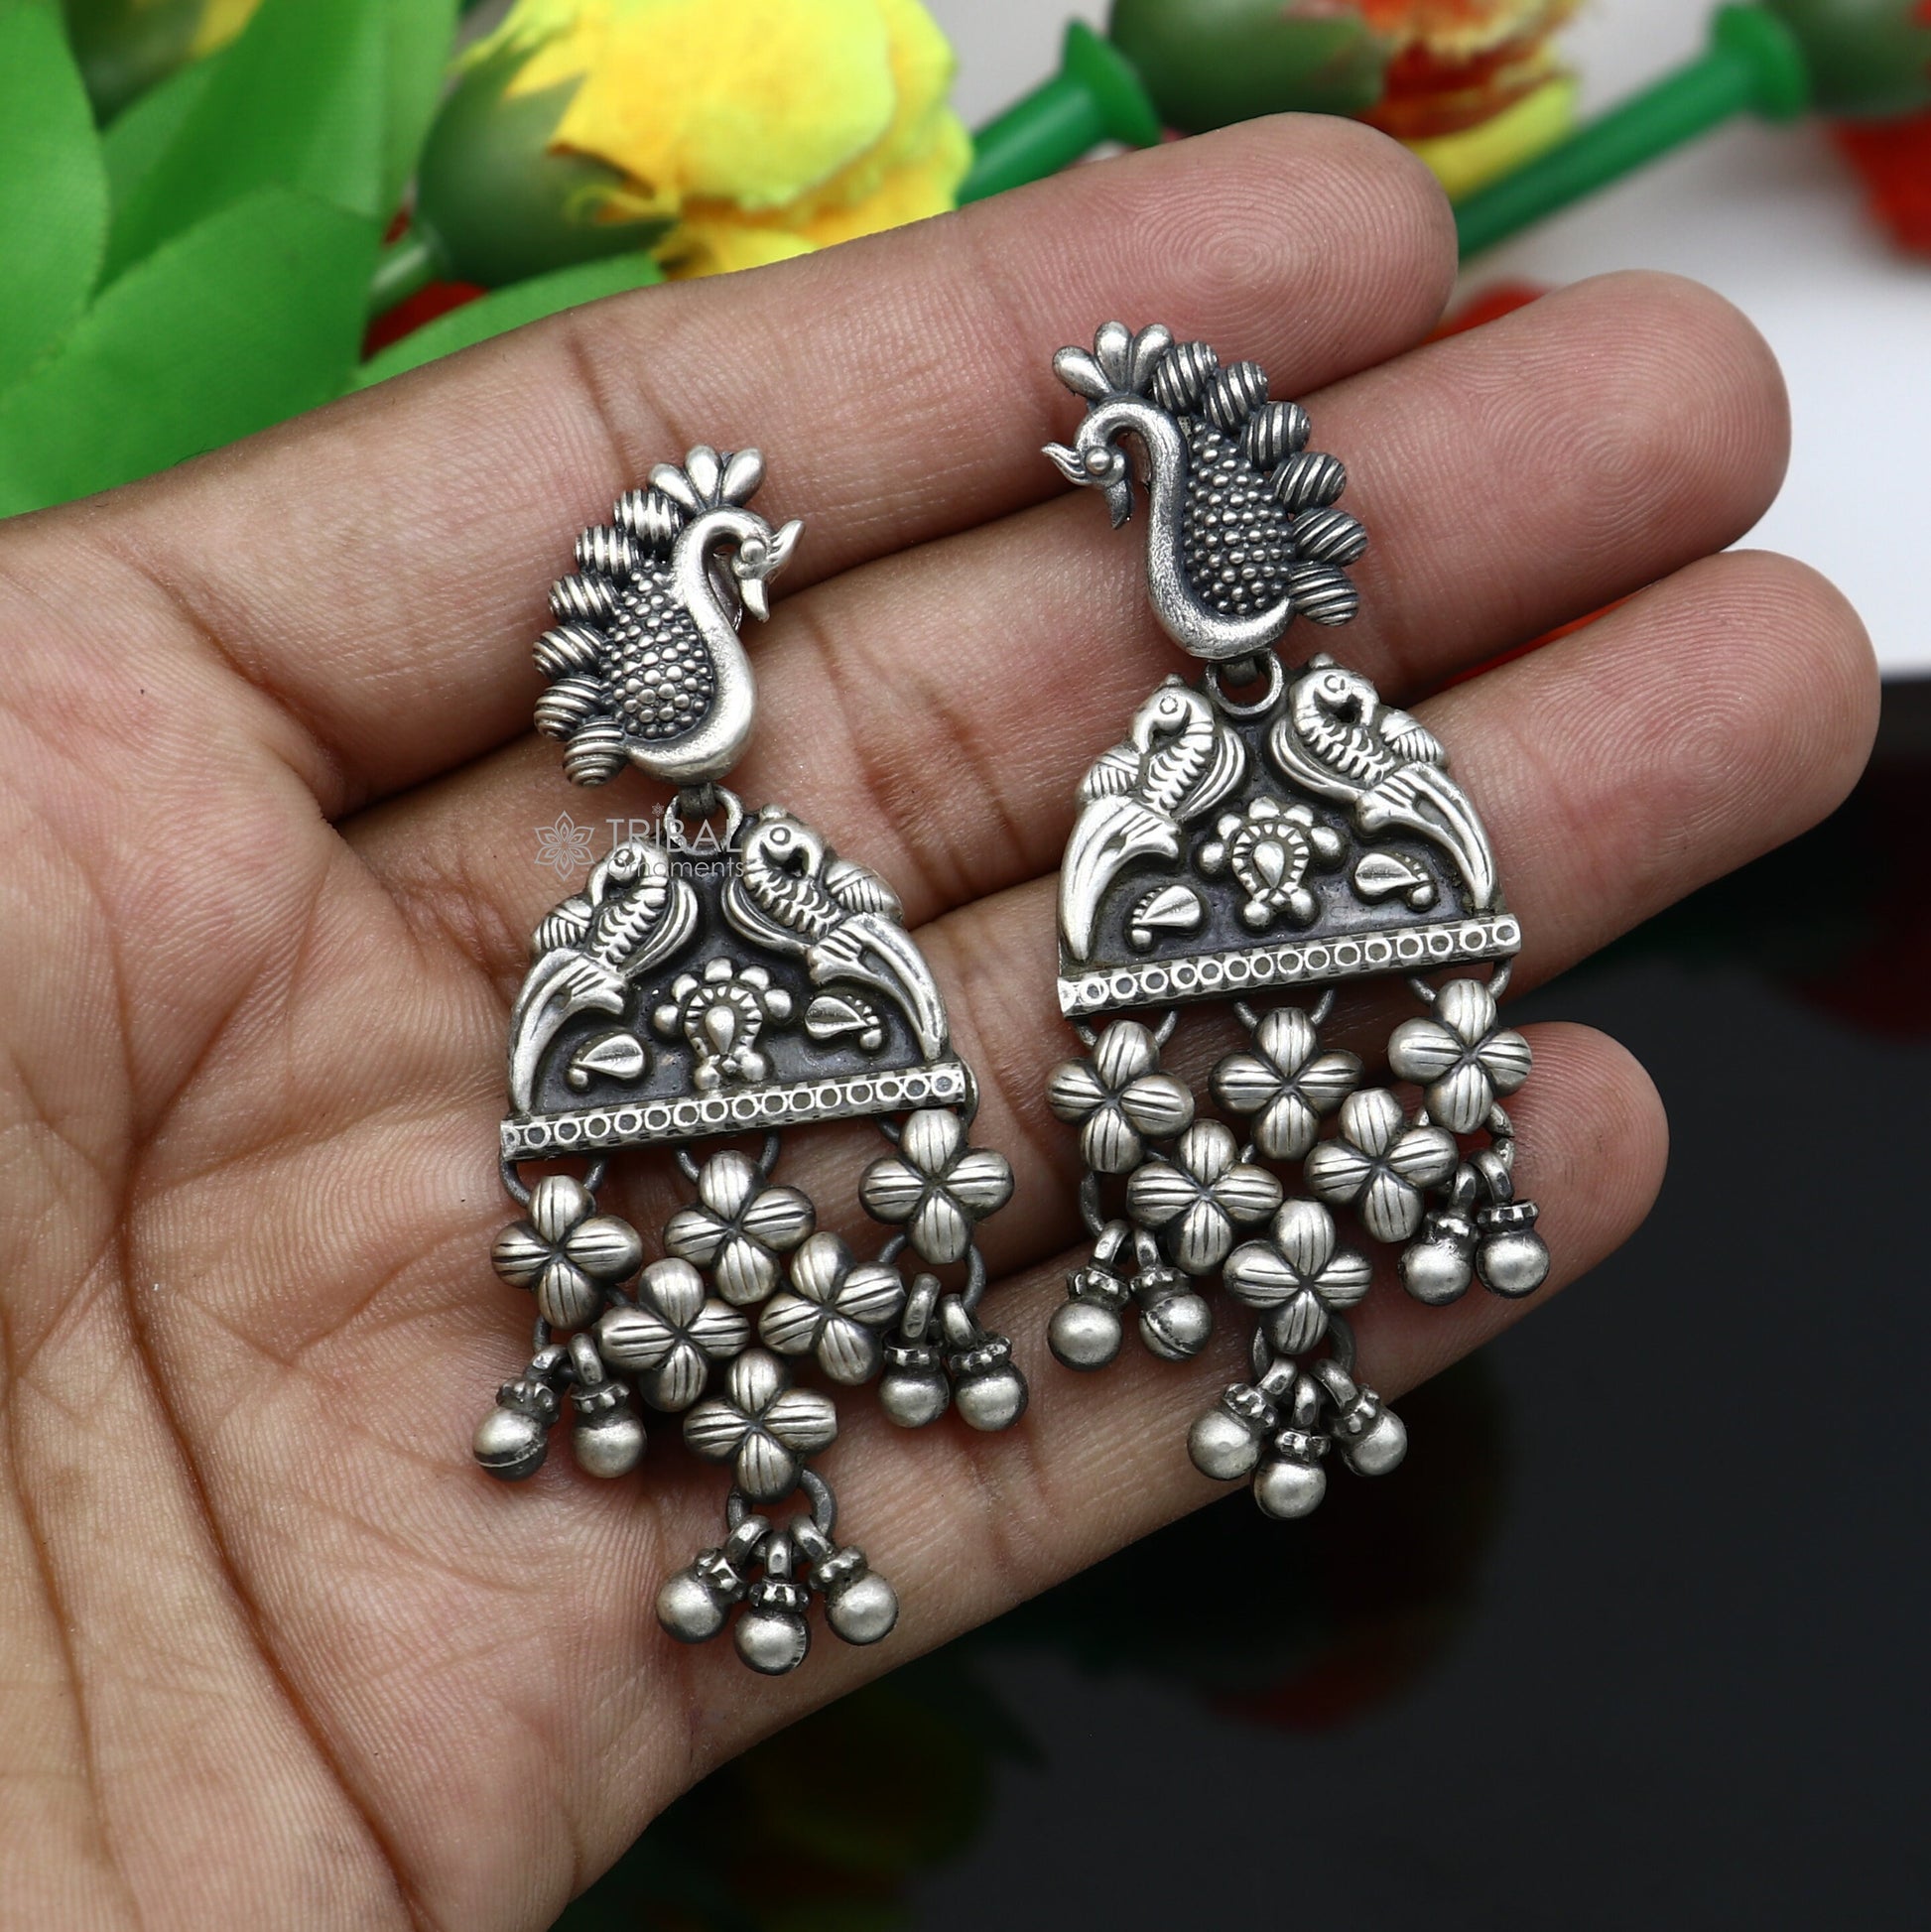 925 sterling silver handcrafted earring, stud earring, amazing peacock design drop dangle modern stylish party wear gifting earring s1228 - TRIBAL ORNAMENTS